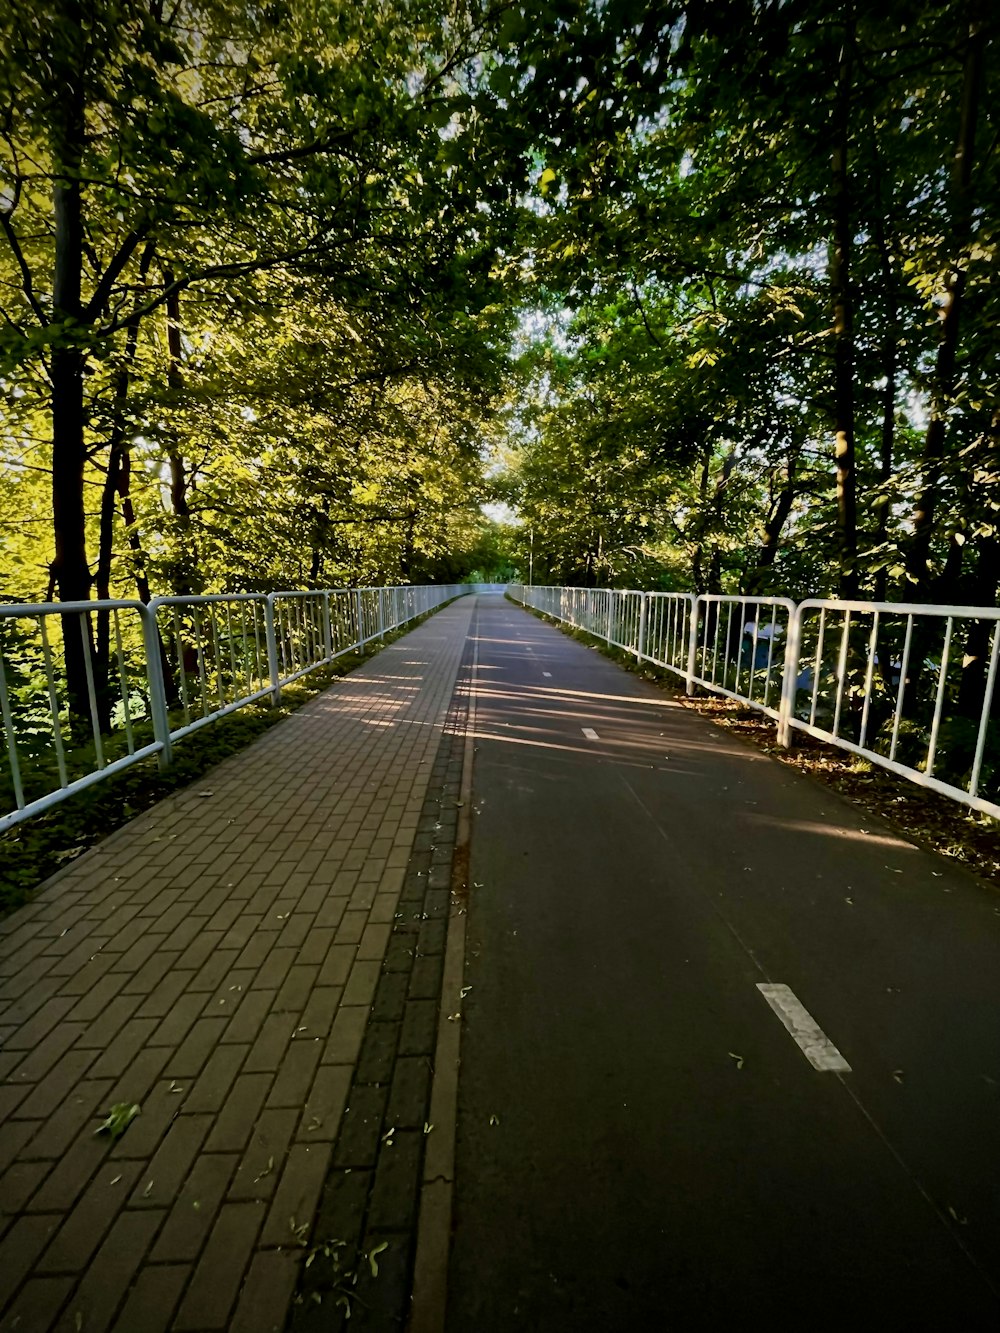 a paved road with a white fence and trees